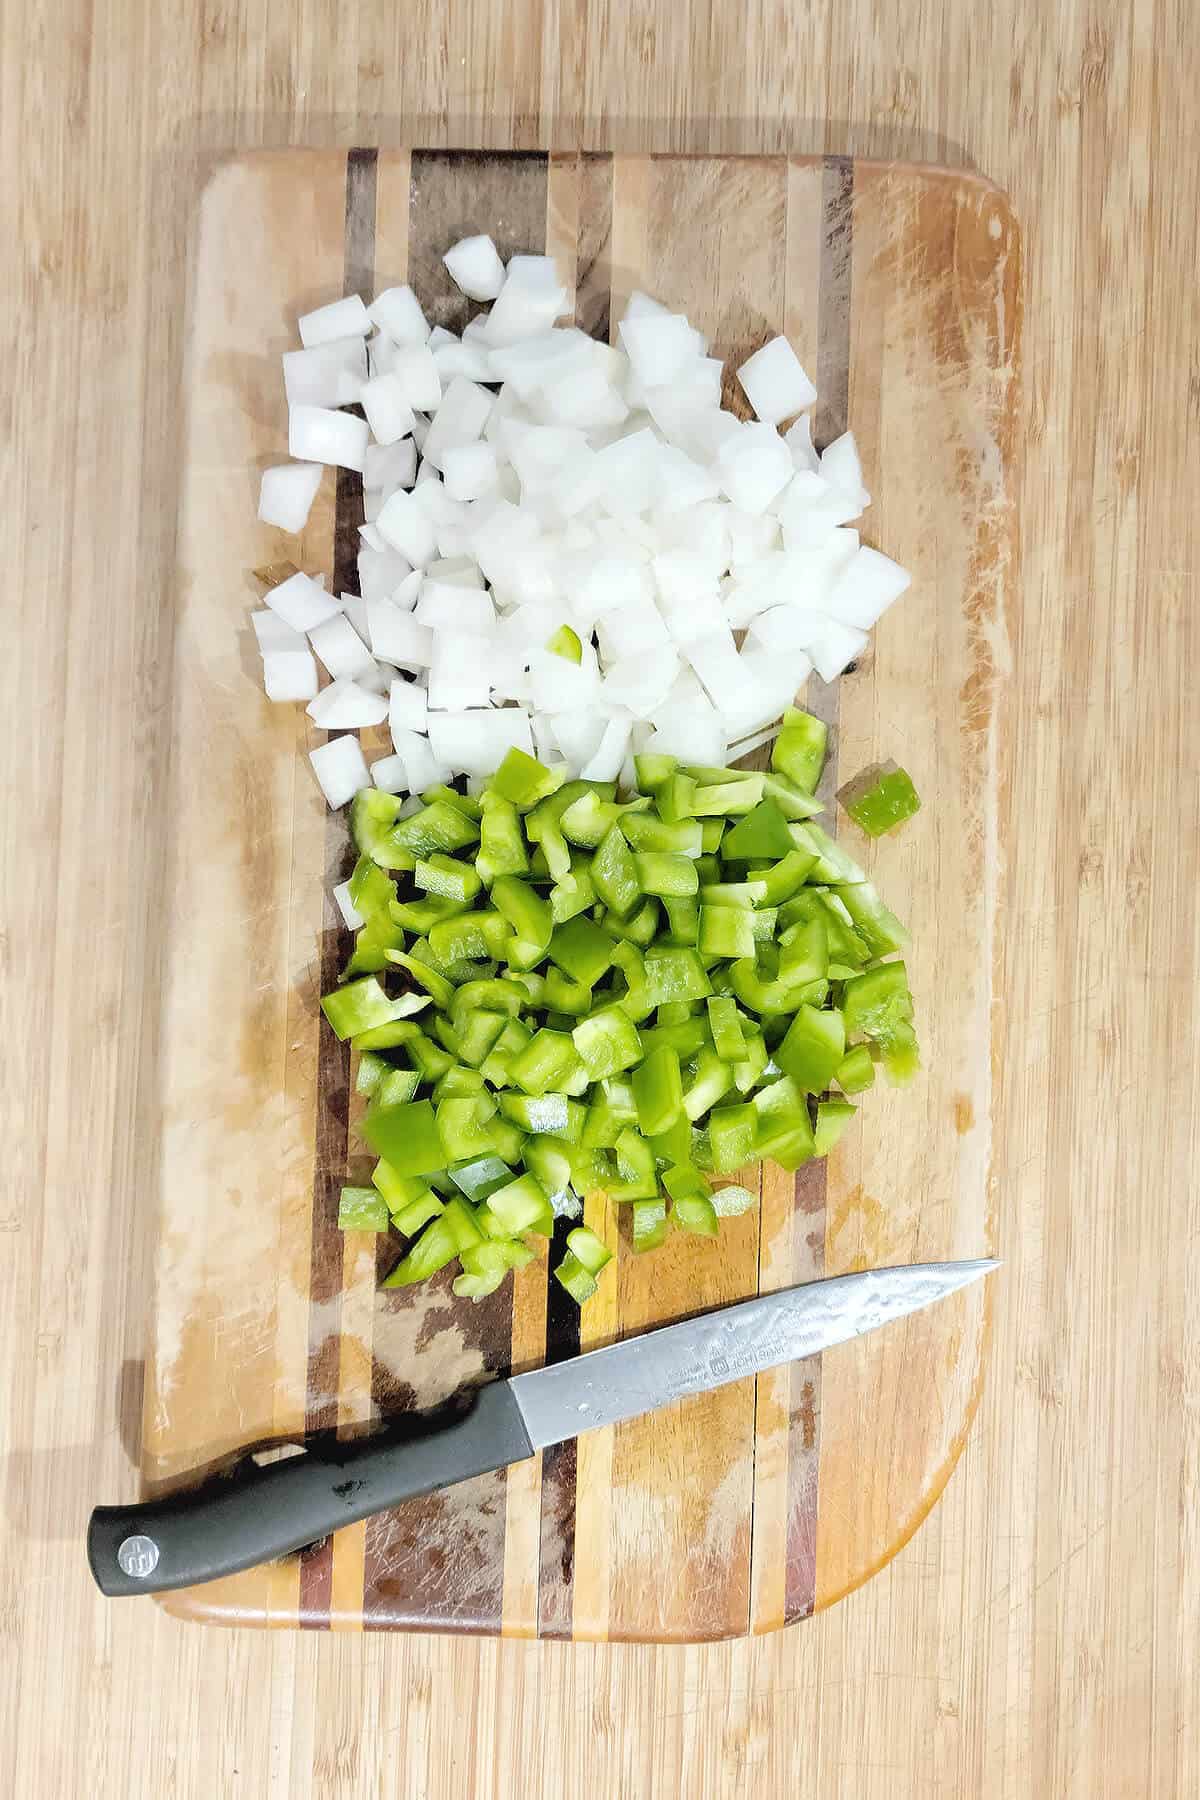 Chopped onions and green bell pepper on a cutting board.